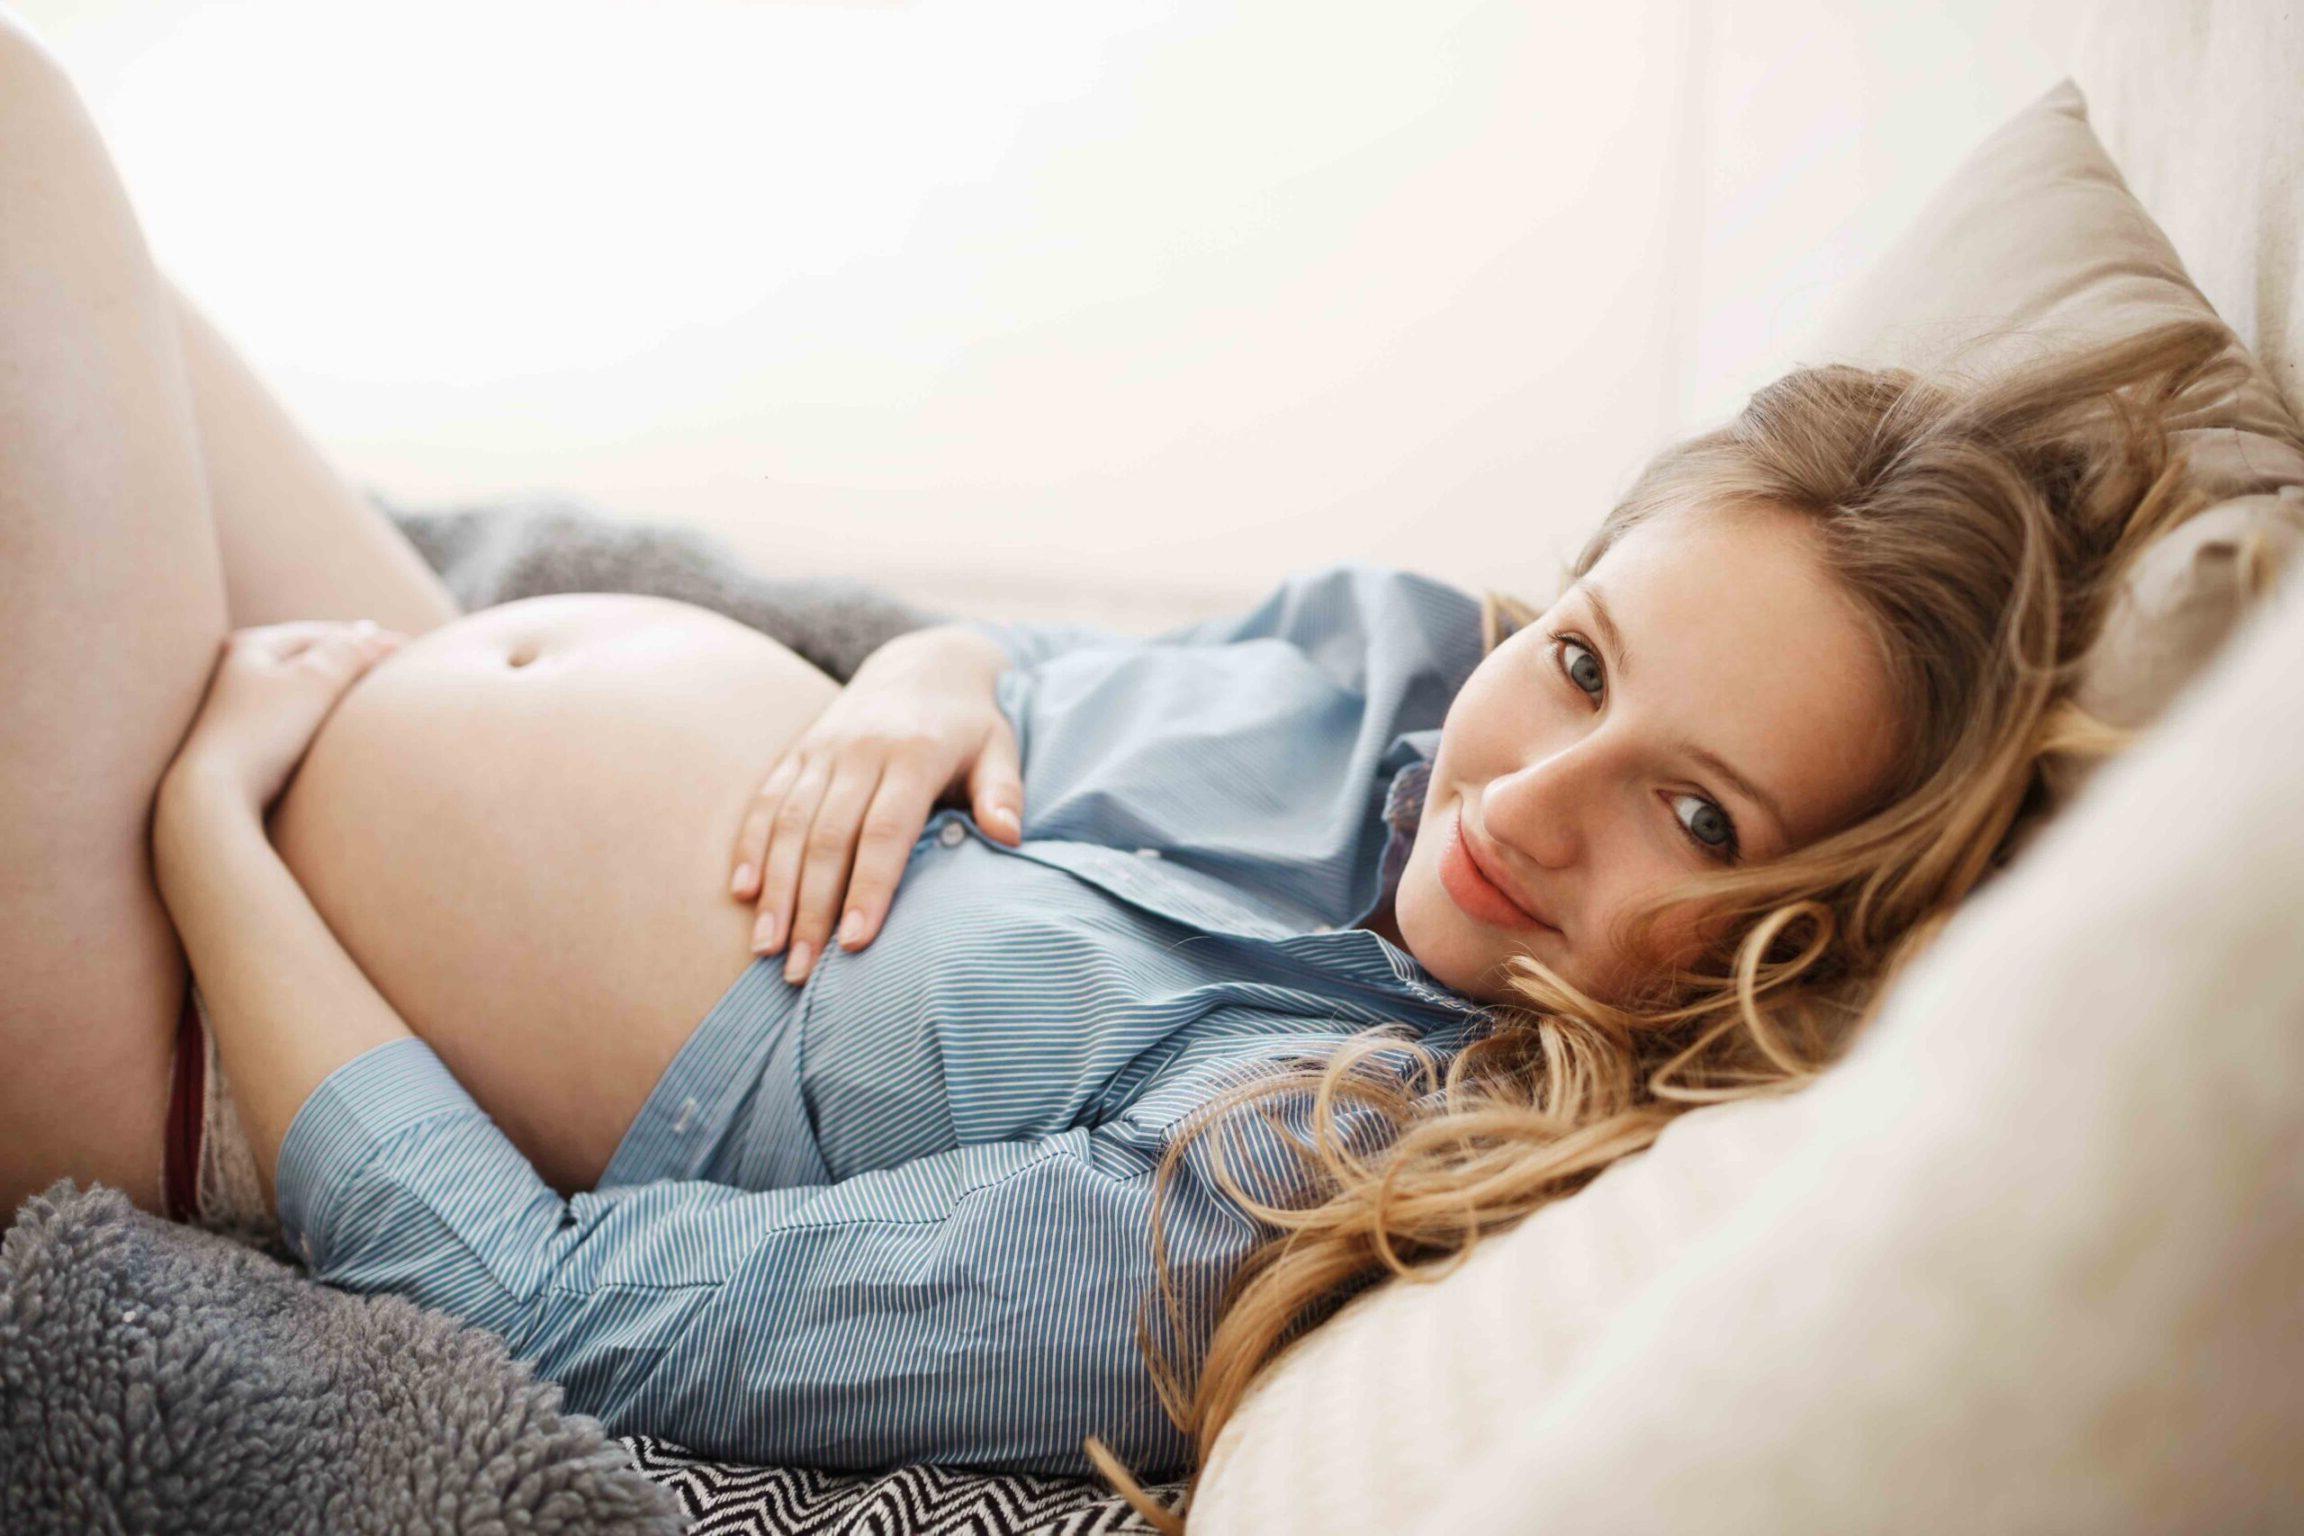 Woman enjoying her pregnancy relaxing in comfy bed